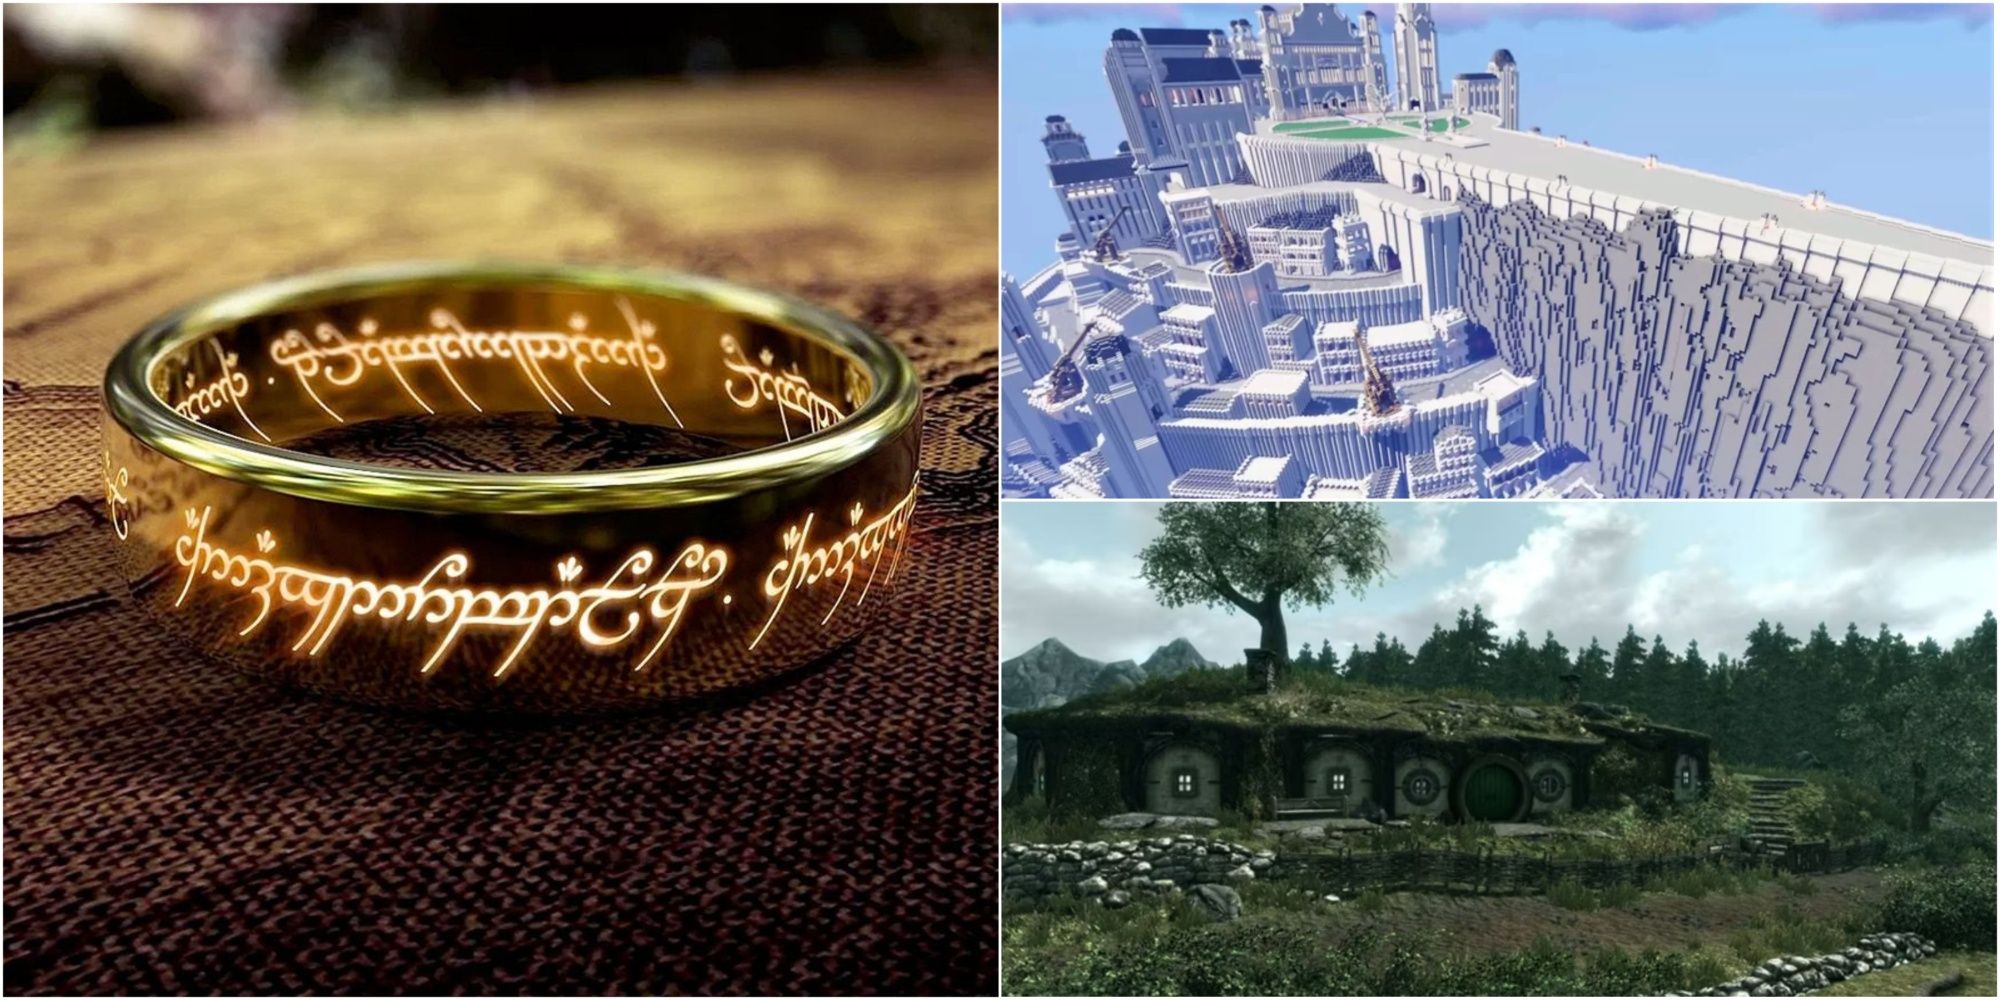 Minecraft Players Are Recreating The Lord Of The Rings In-Game